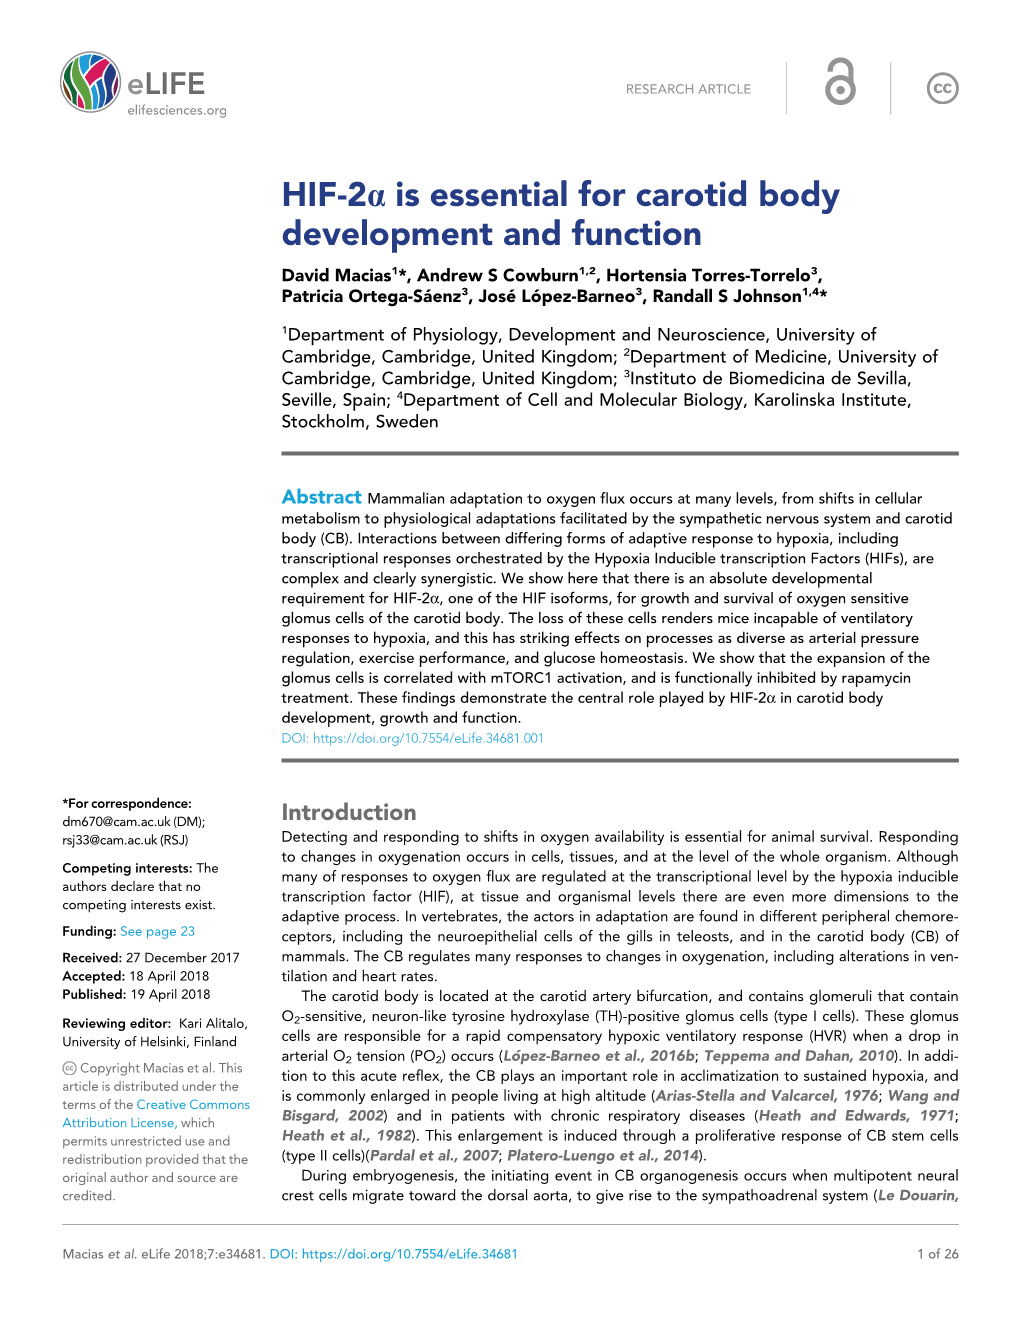 HIF-2A Is Essential for Carotid Body Development and Function